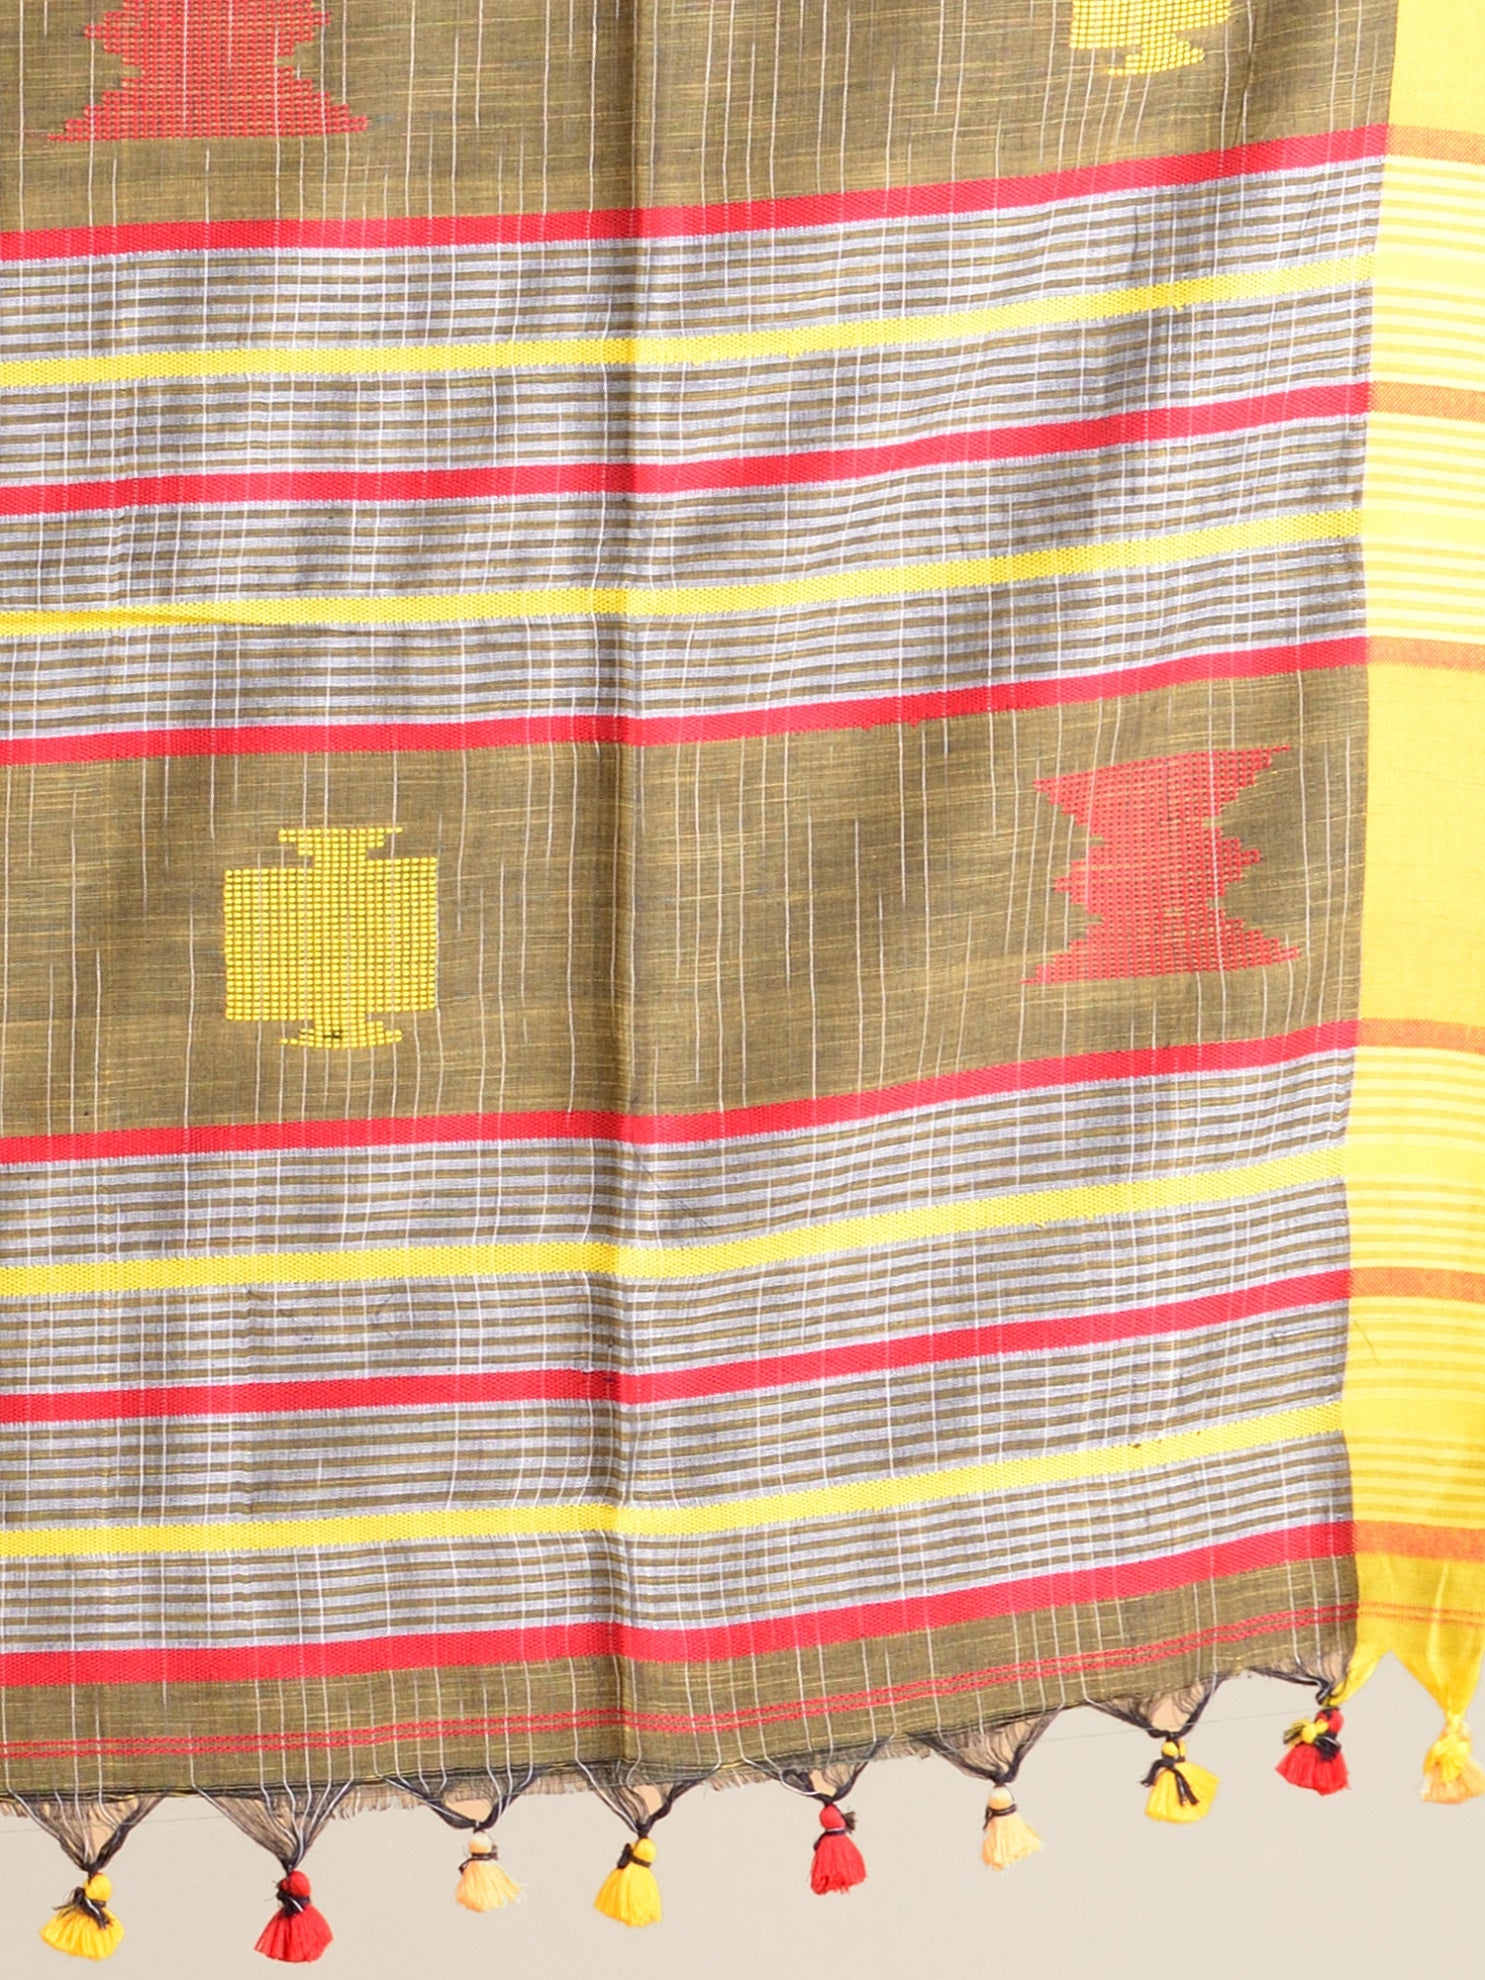 Women's Fawn Color Hand Woven Soft Cotton Saree With Unstitched Blouse-Sajasajo